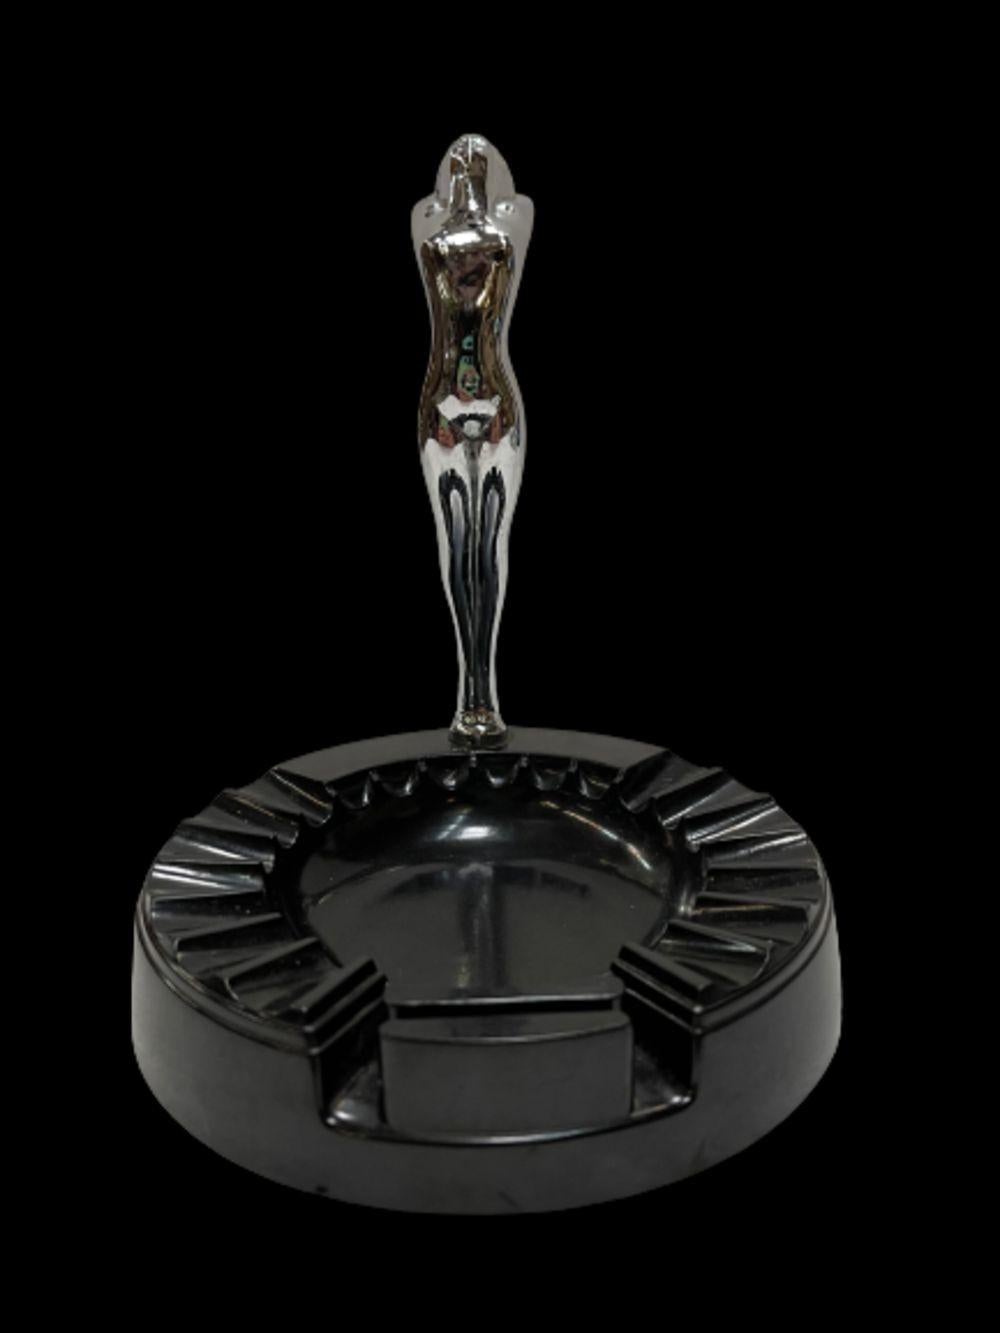 This Chicago-manufactured ashtray is a fine piece for the tobacco connoisseur. The tray is made from Bakelite and the goddess figure is chrome. The goddess is reminiscent of hood ornaments from classic cars of the 1930s, 1940s, and 1950s. She's